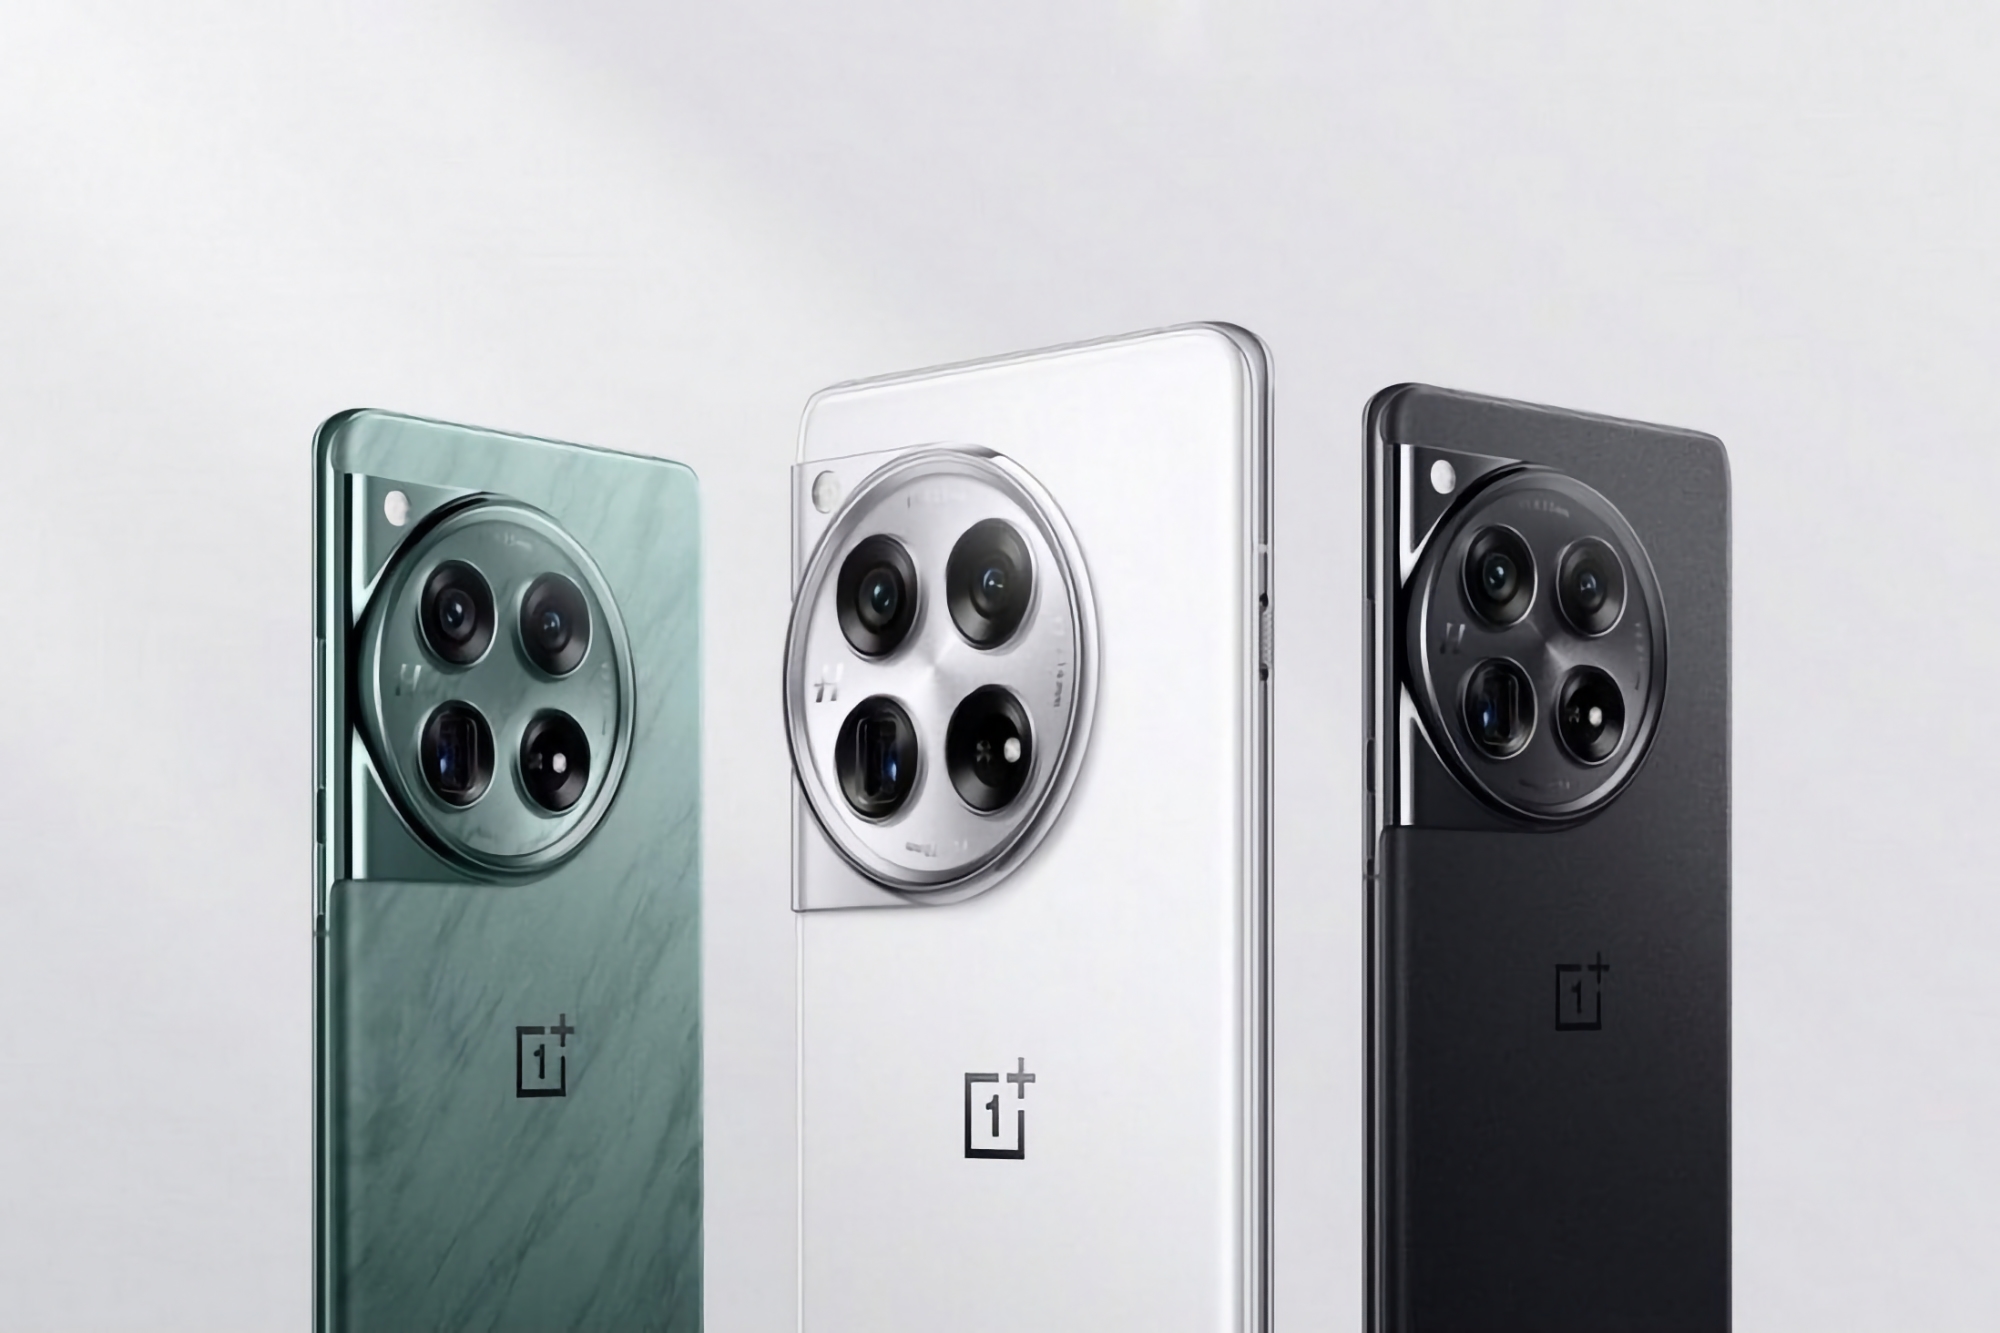 Insider: OnePlus 13 will get an updated design and might be the first smartphone on the market with Snapdragon 8 Gen 4 chip